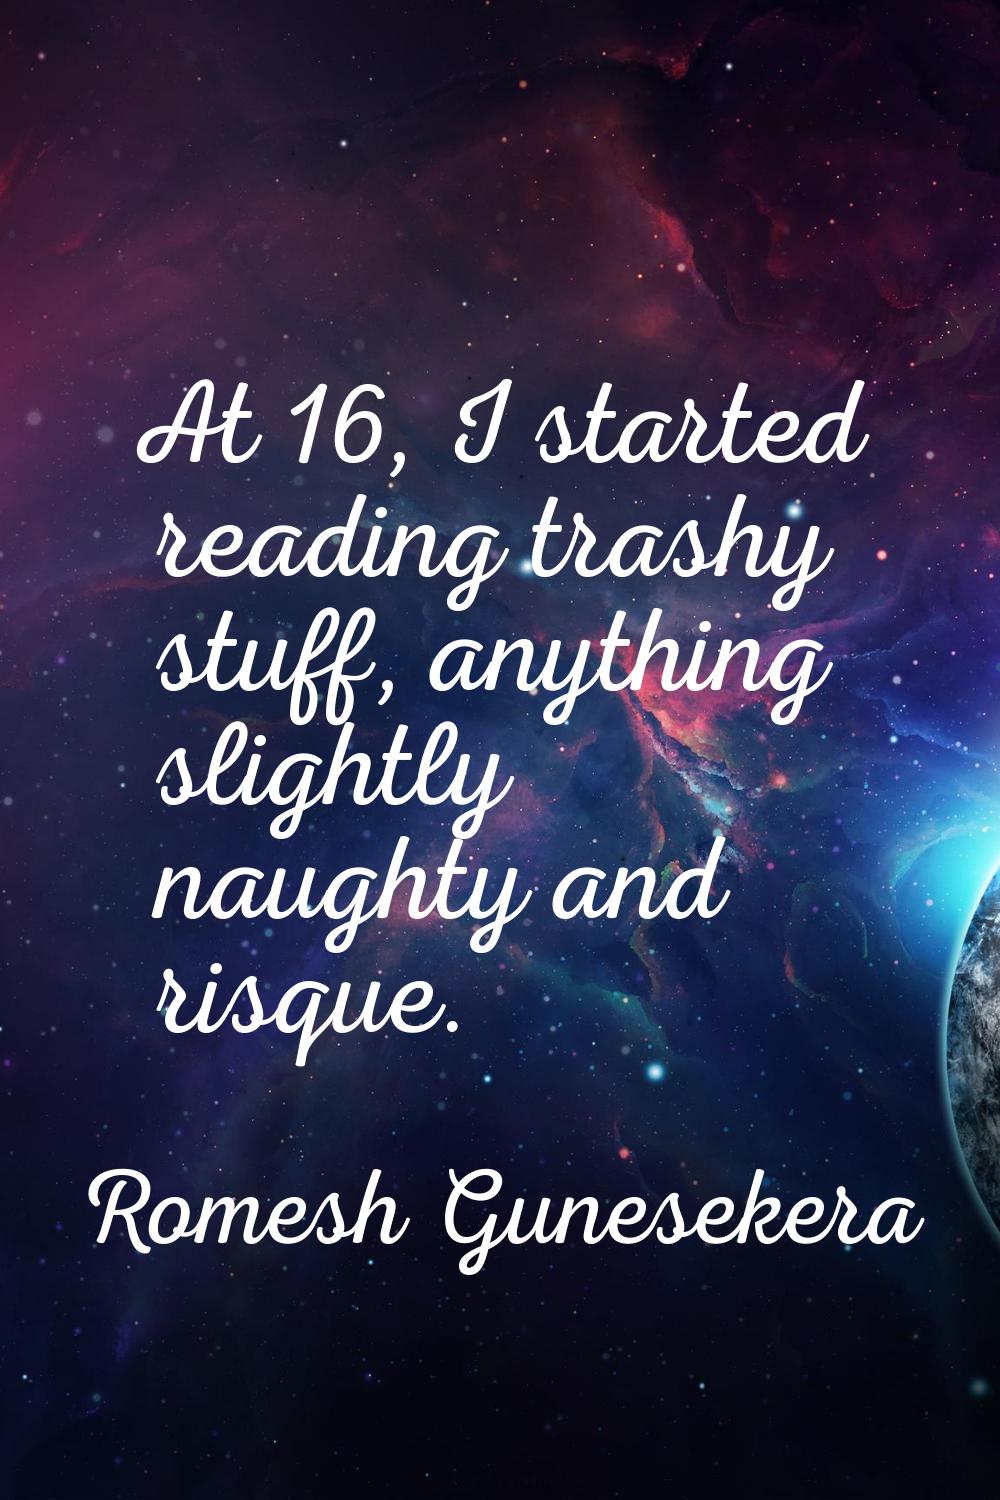 At 16, I started reading trashy stuff, anything slightly naughty and risque.